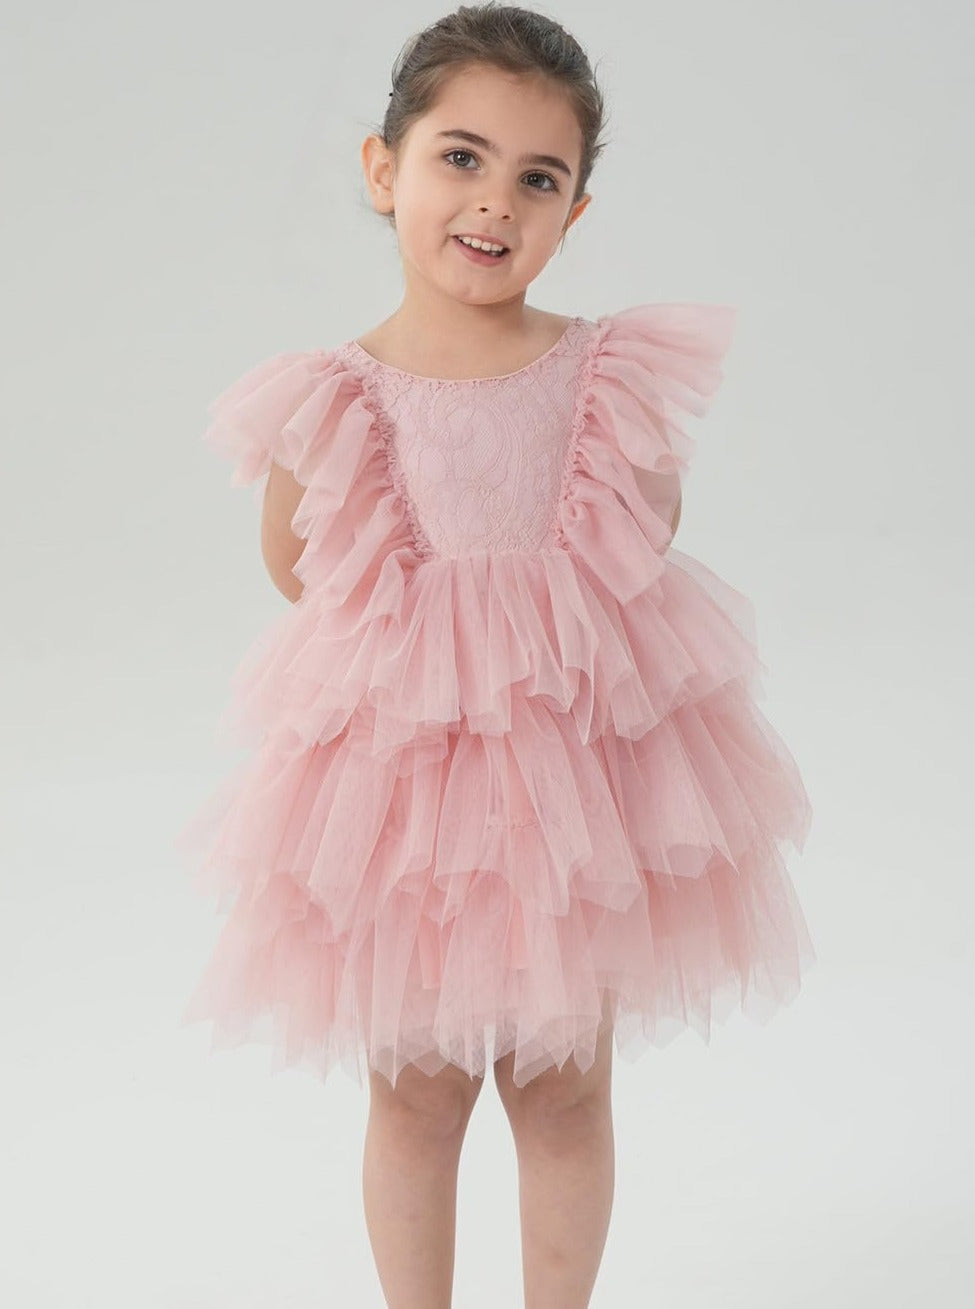 Paisley Lace Flower Girl Dress in Pink